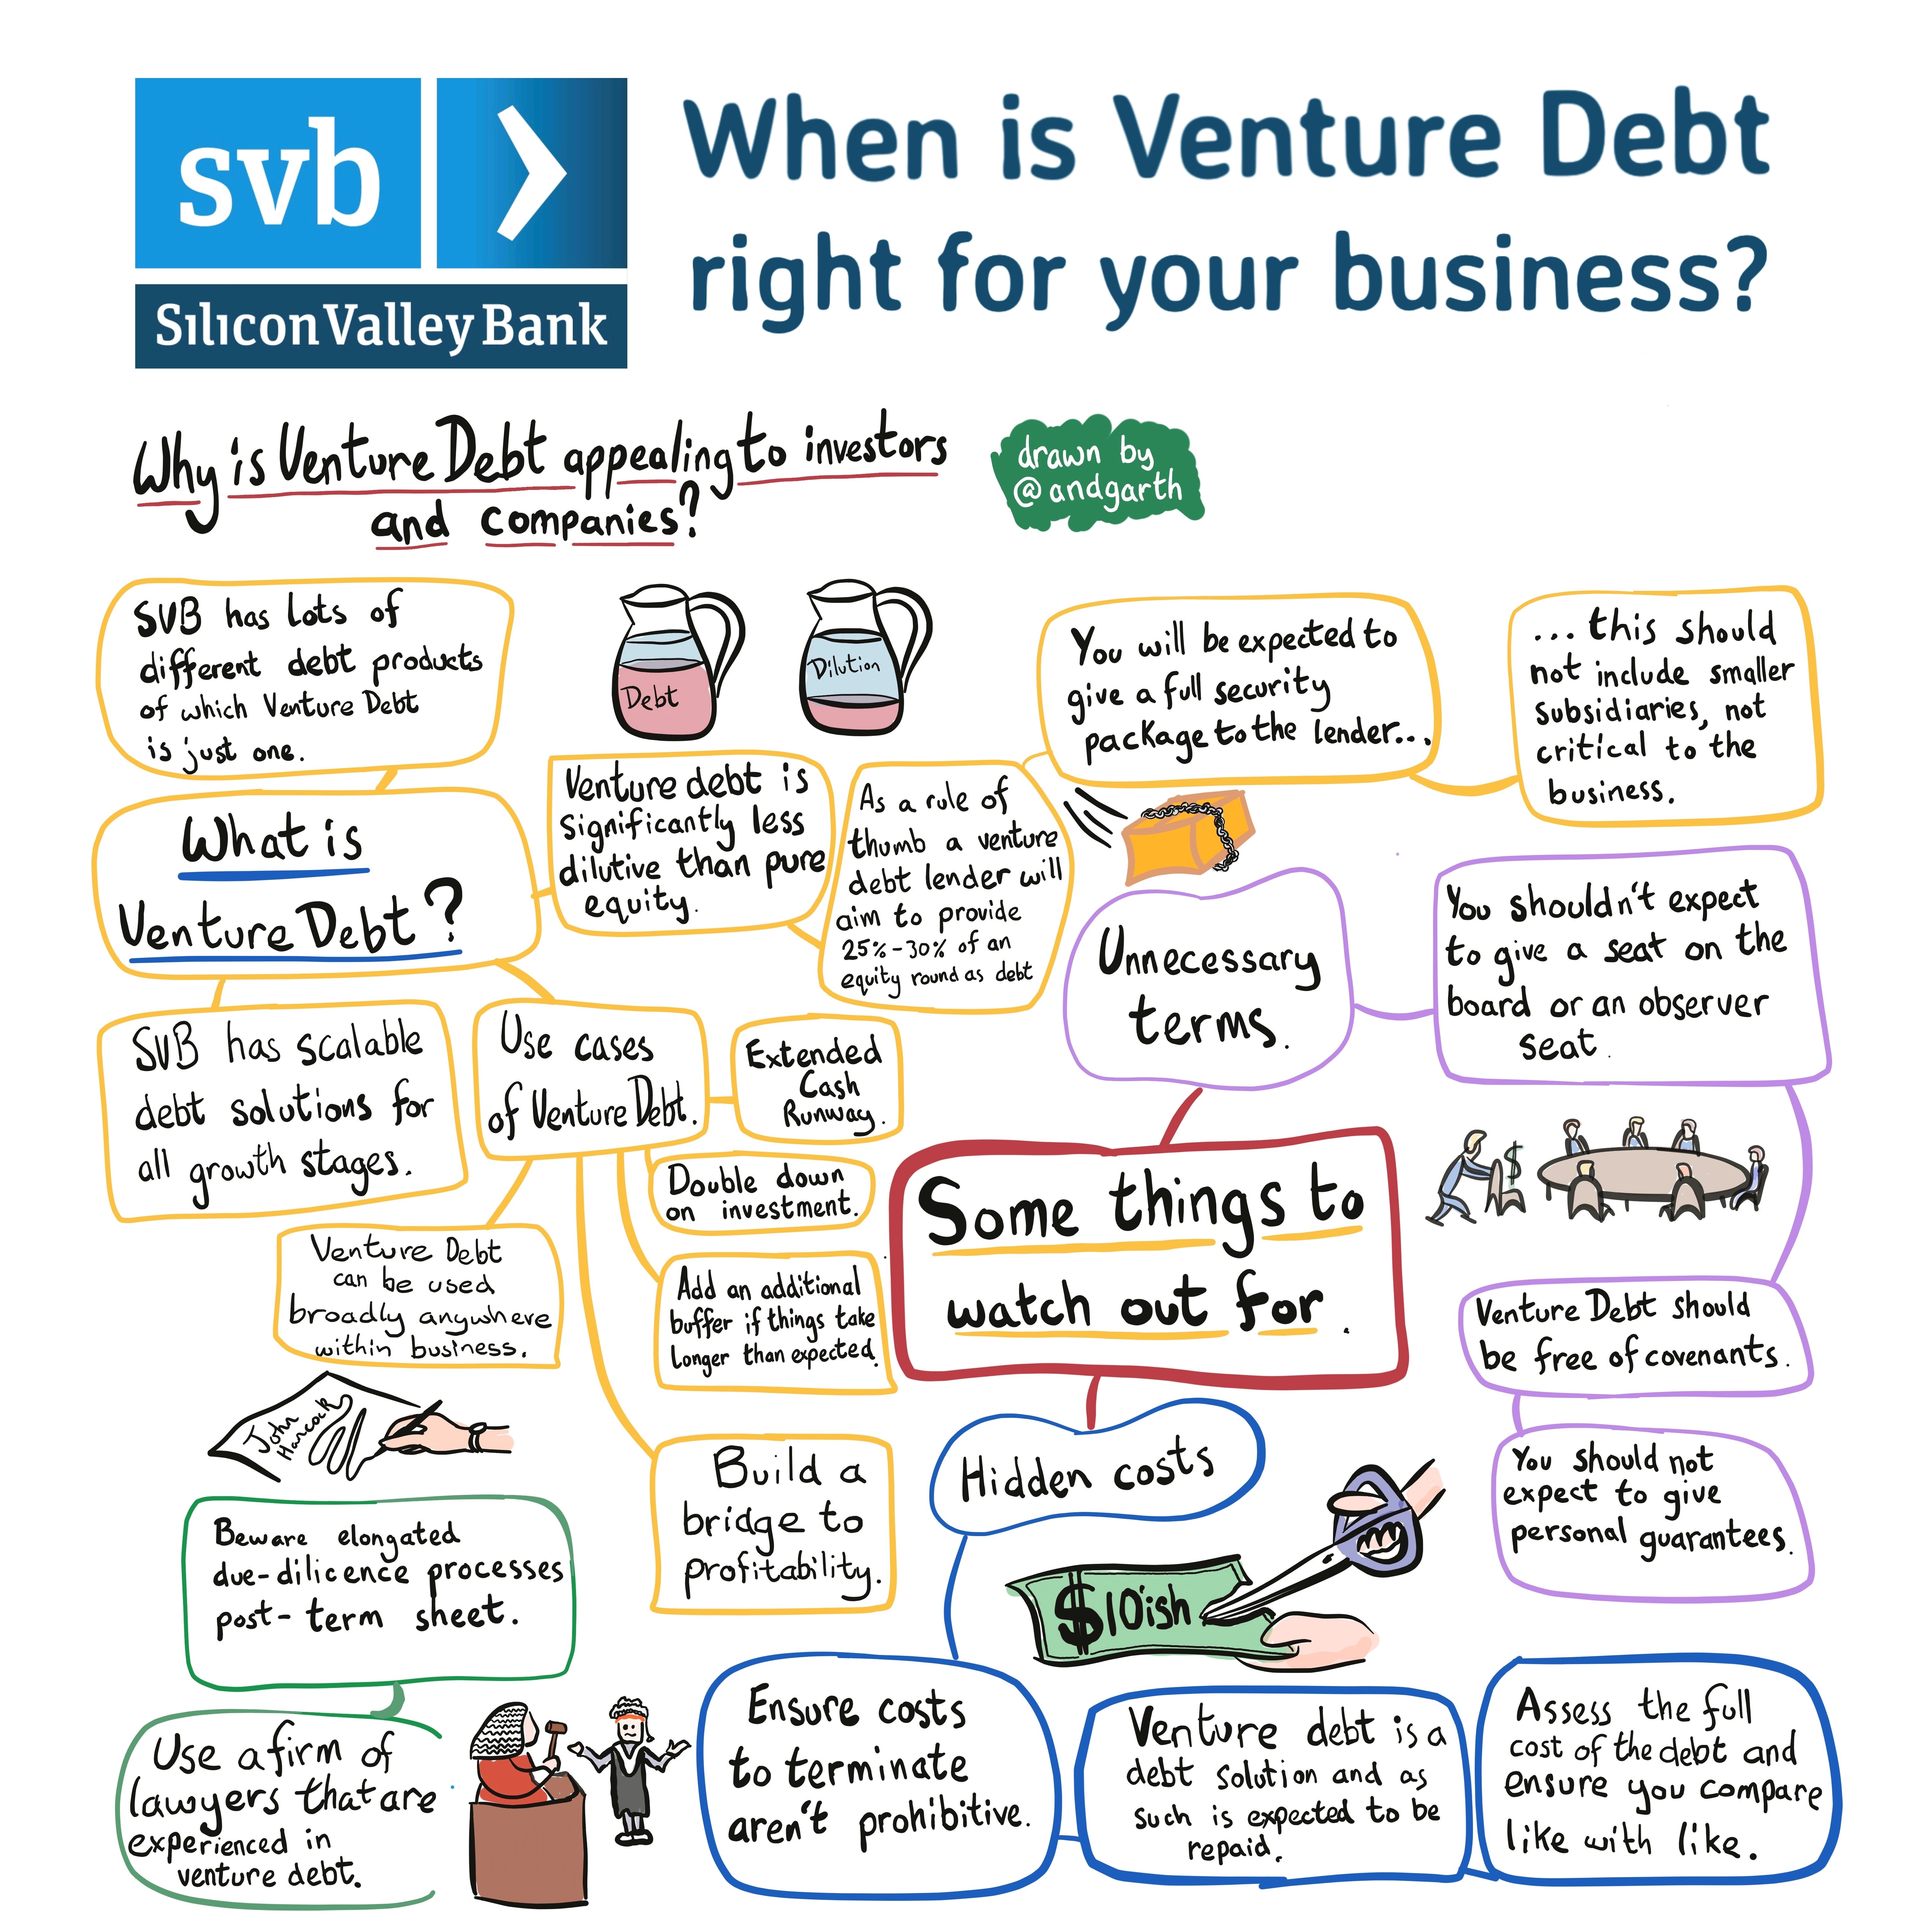 Where to secure venture debt?